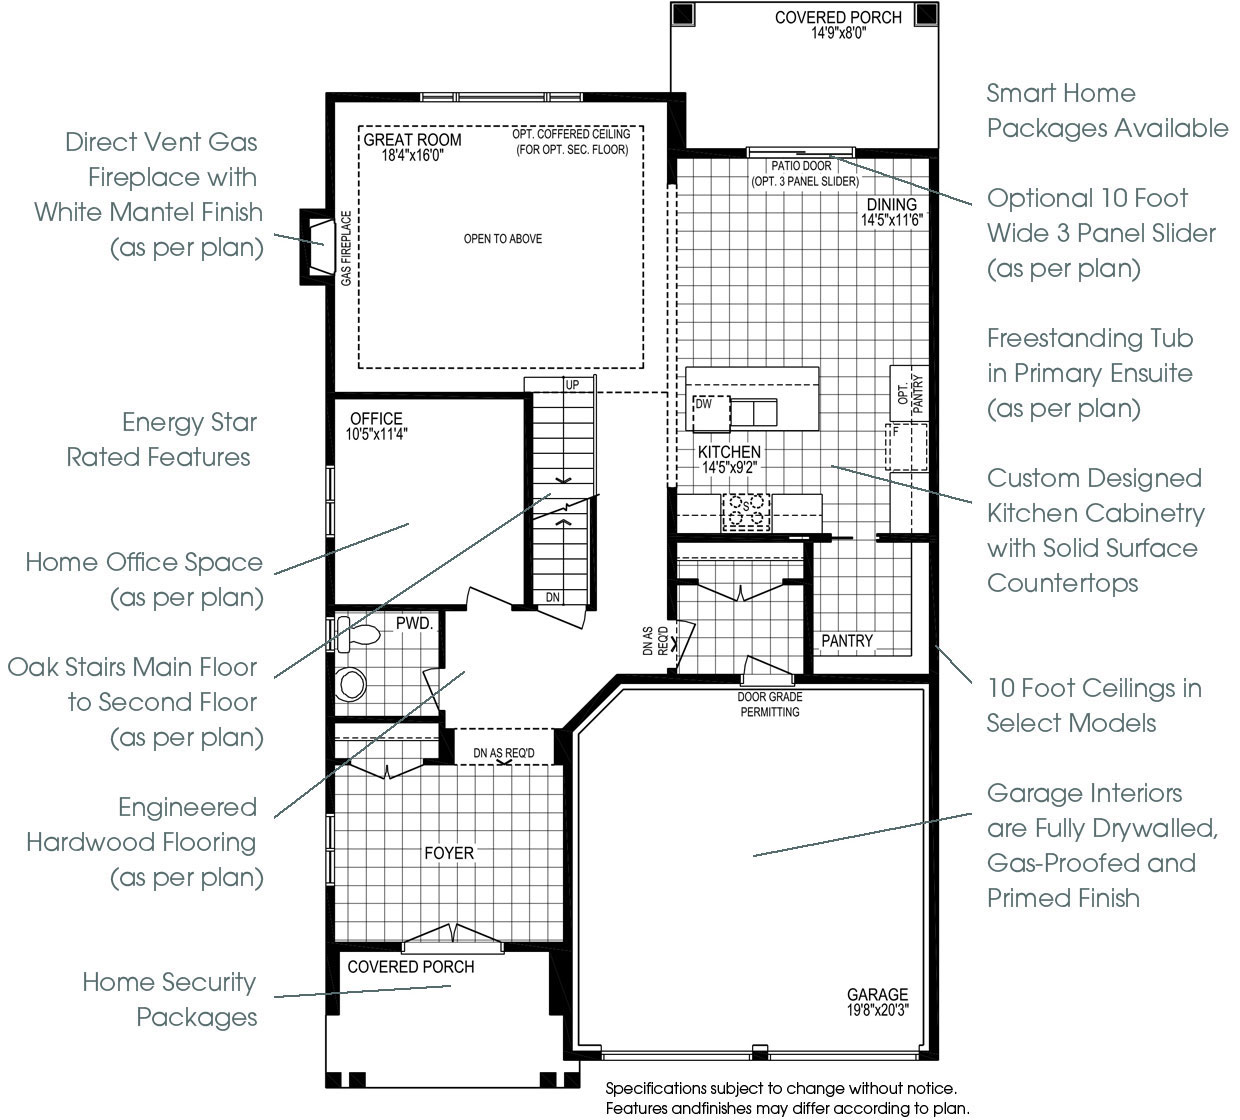 Views sample floor plan with features list